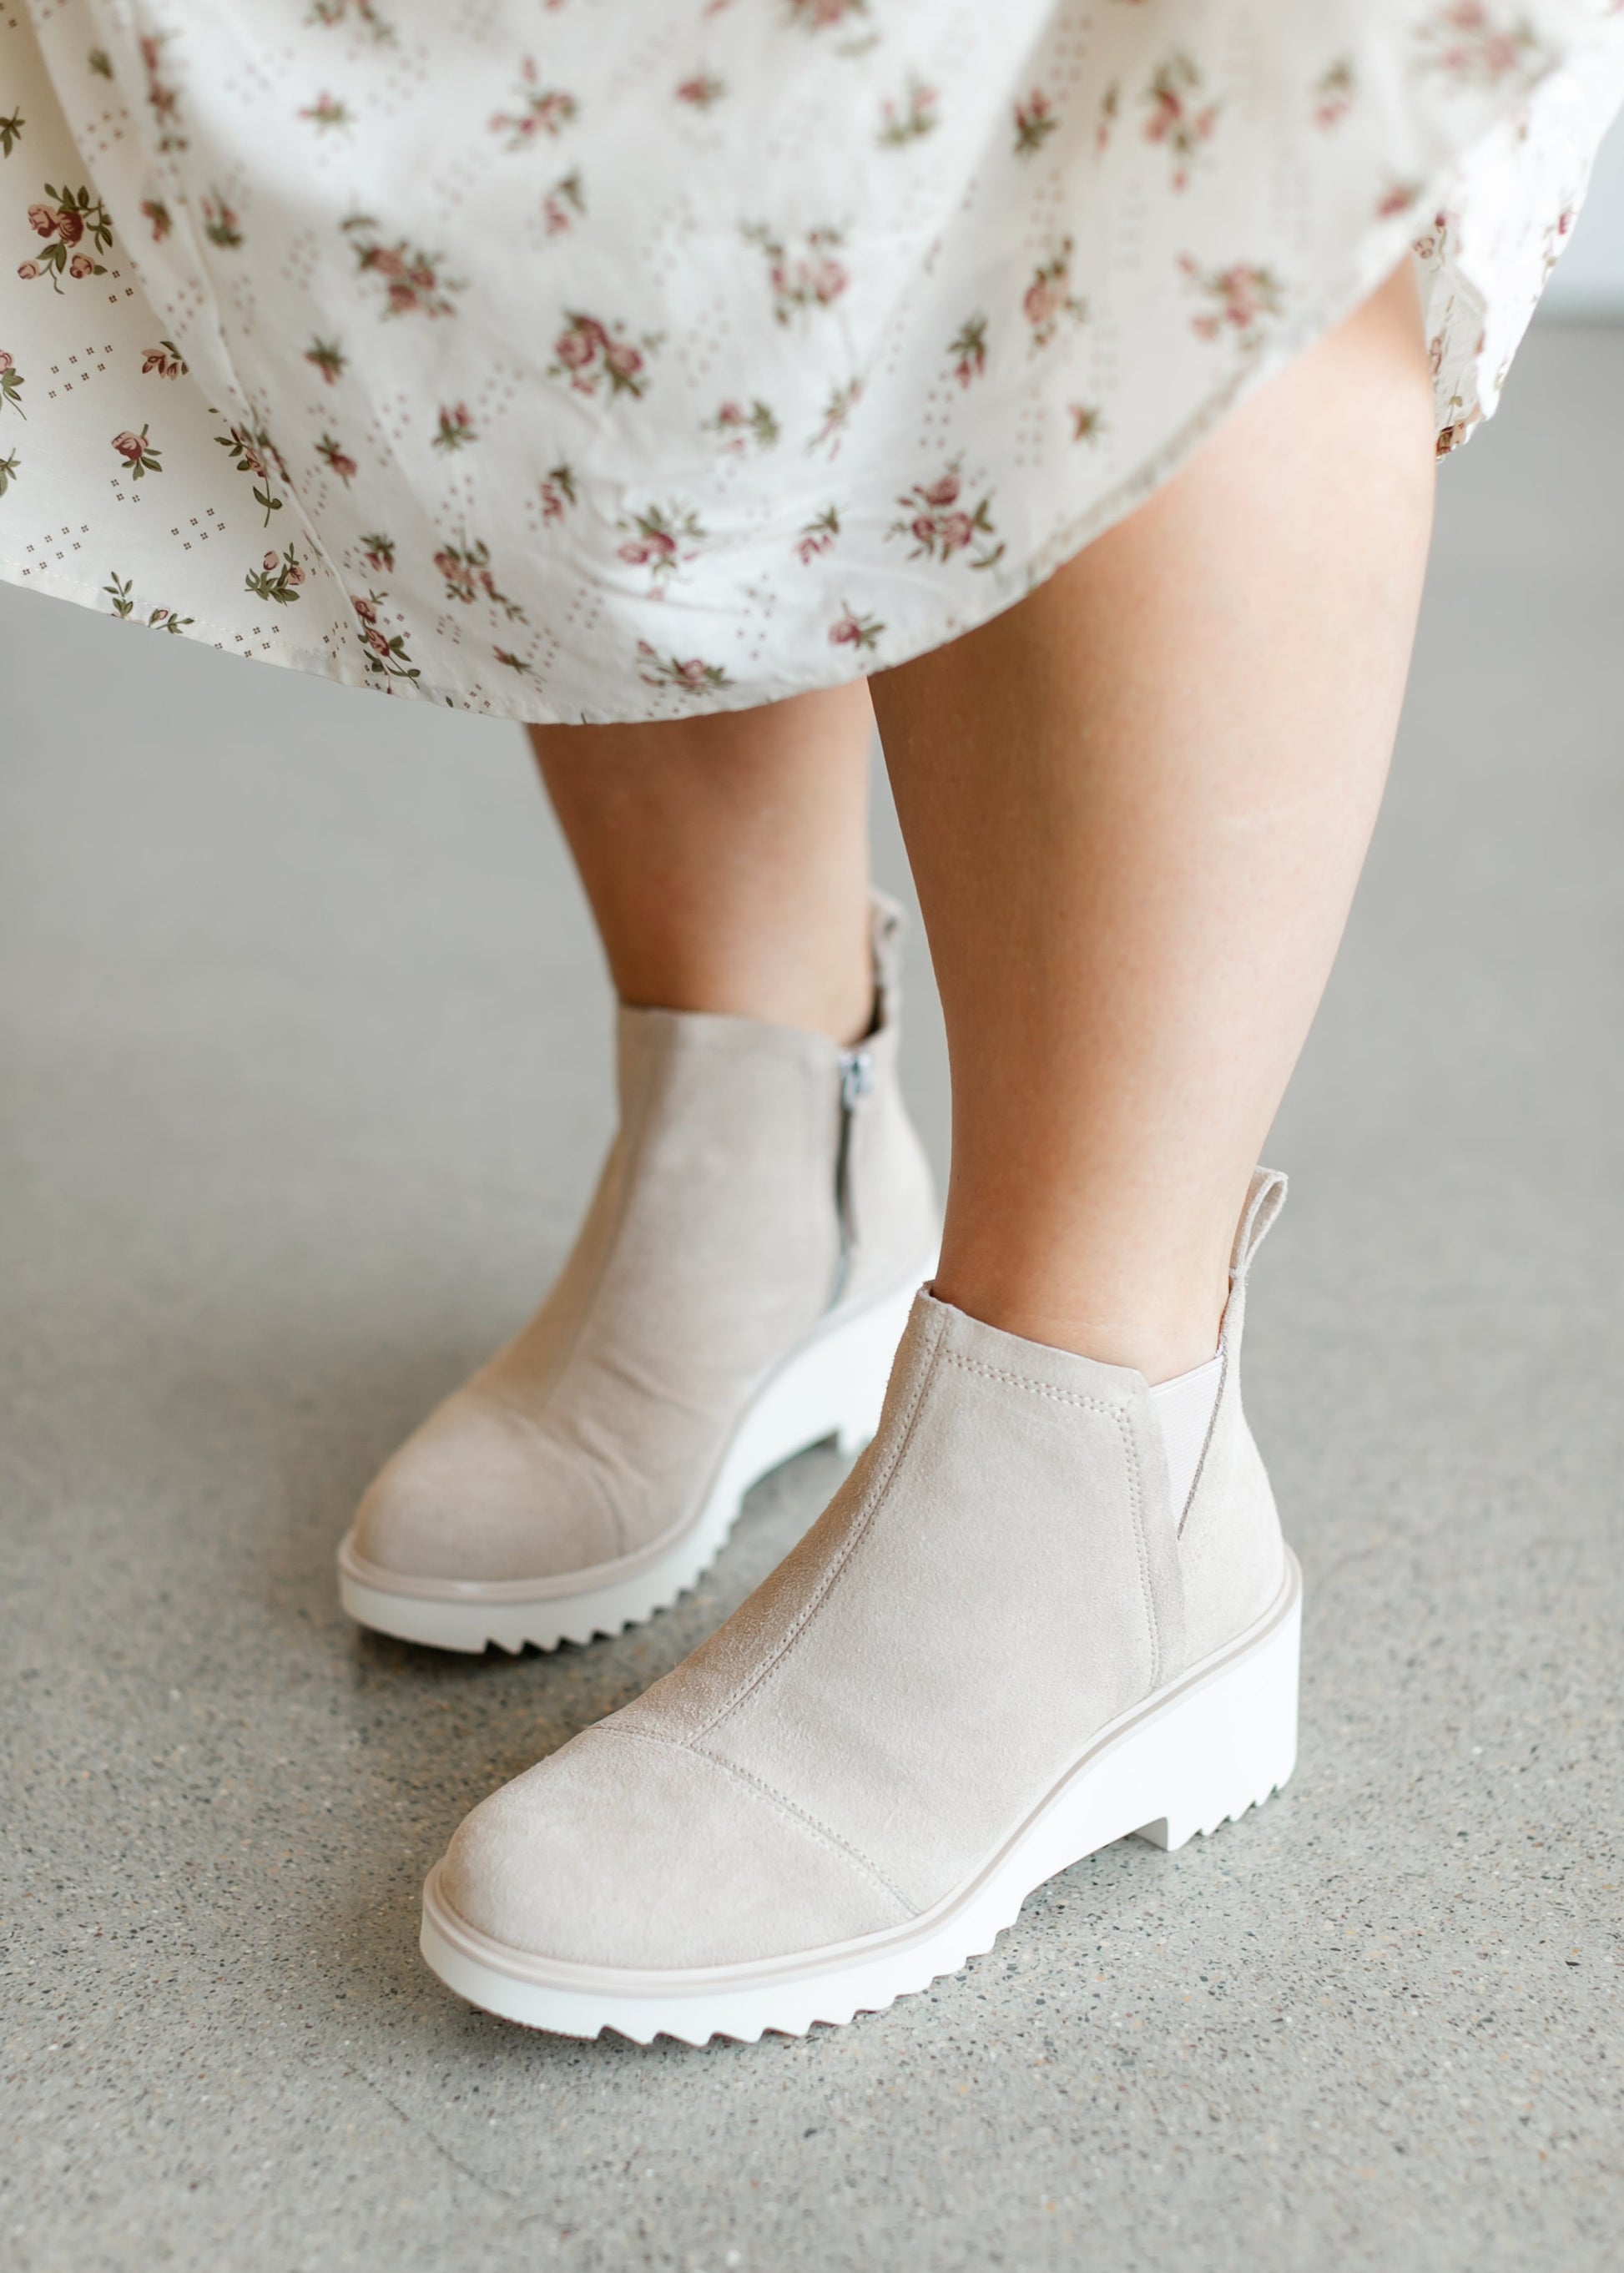 TOMS®  Maude Wedge Bootie Shoes